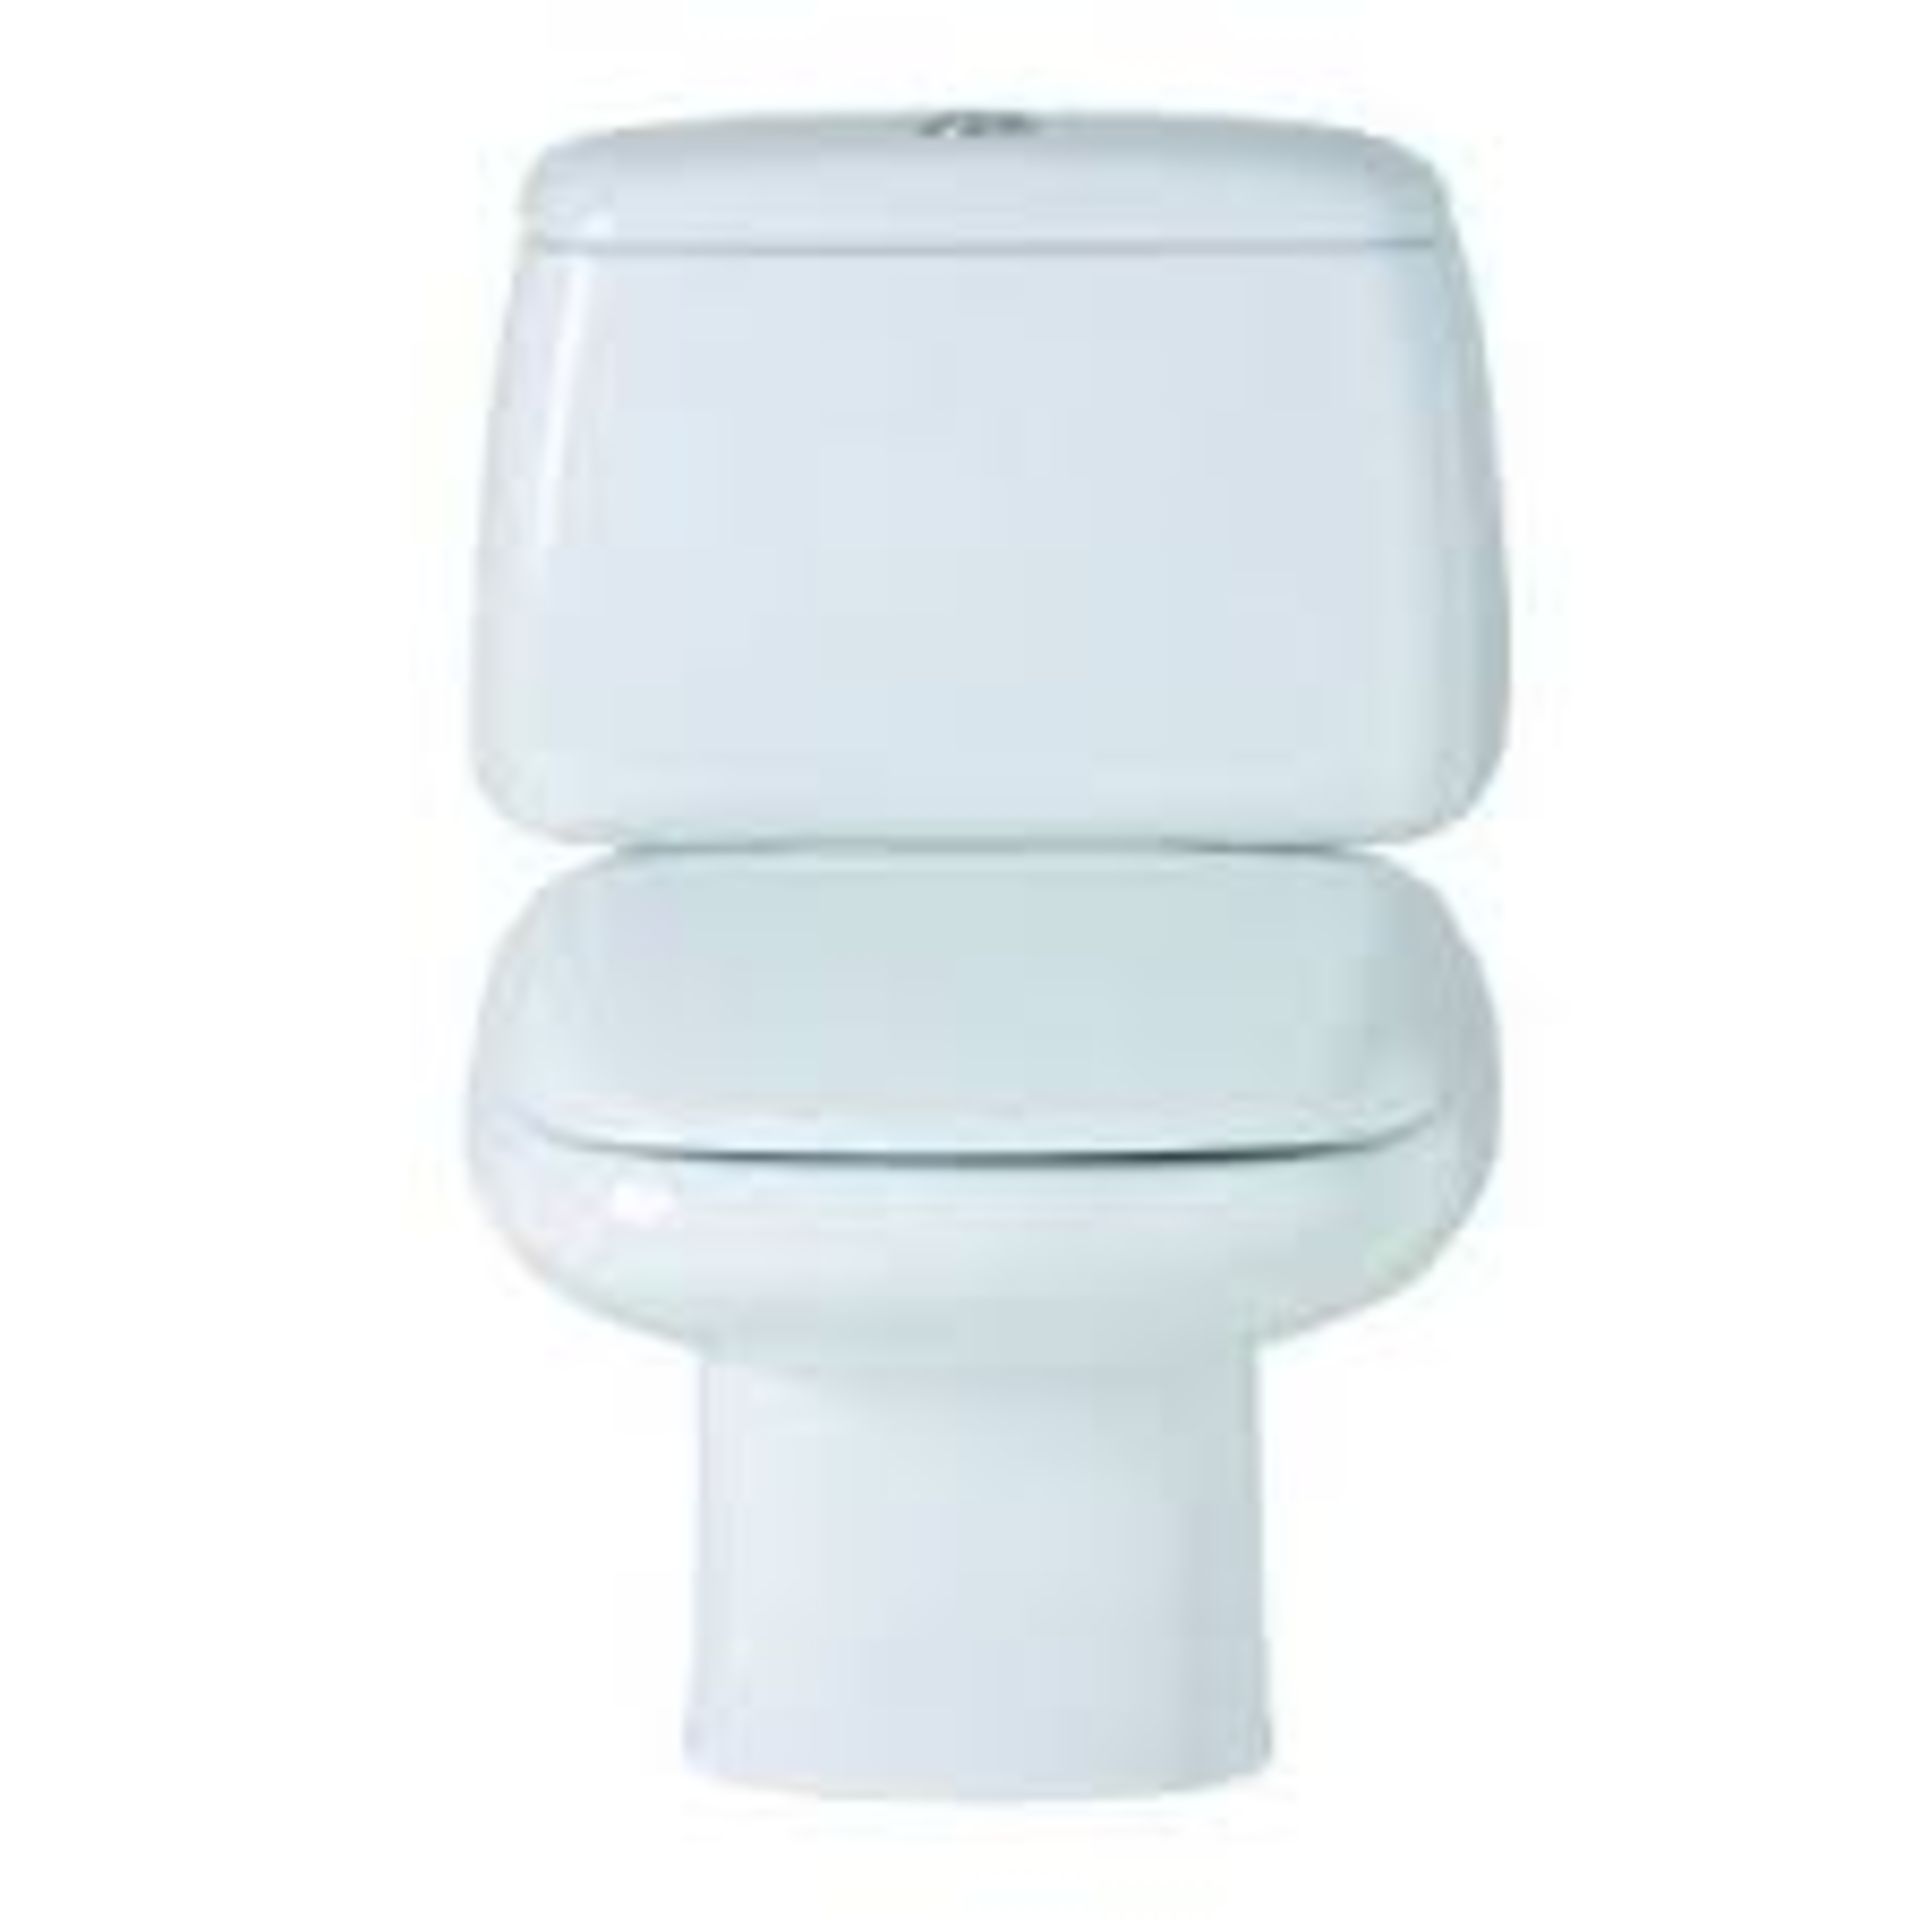 Pallet - 327 - 22 x Accent close coupled cistern 6or4 litre - SKU - 243515 RRP £1833.04